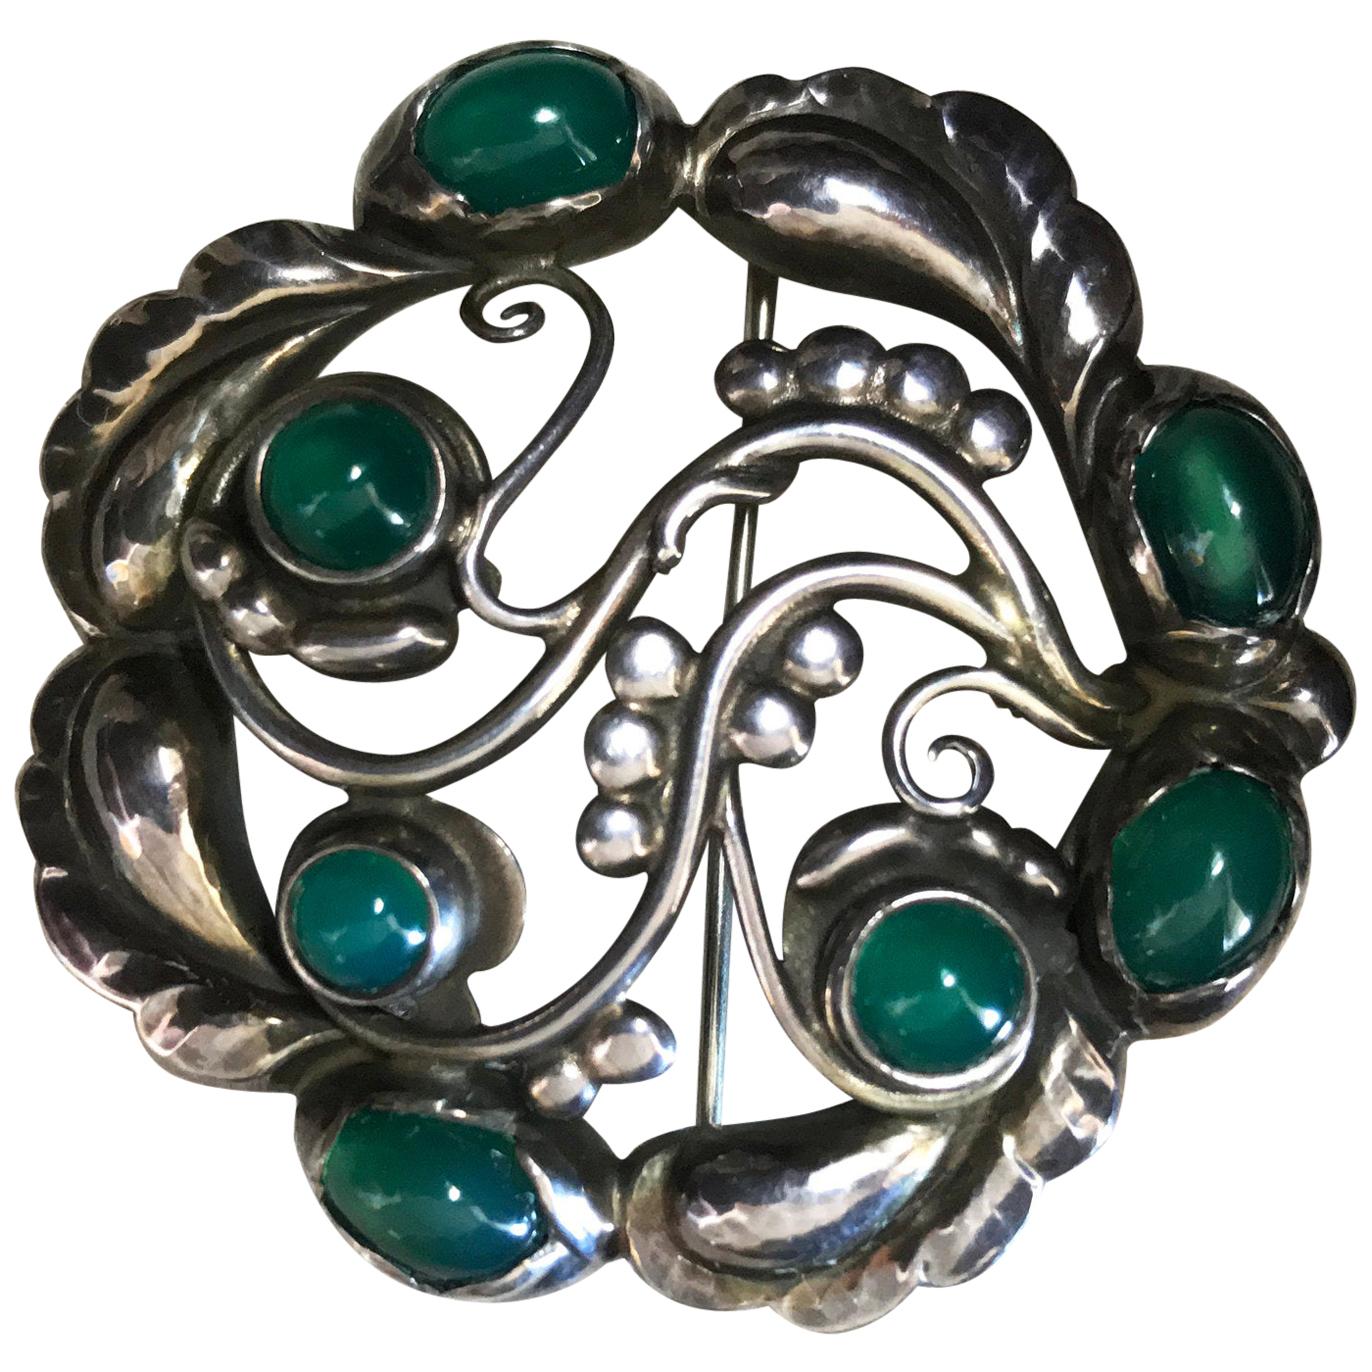 Georg Jensen Sterling Silver Brooch with Chrysoprase No. 159 For Sale